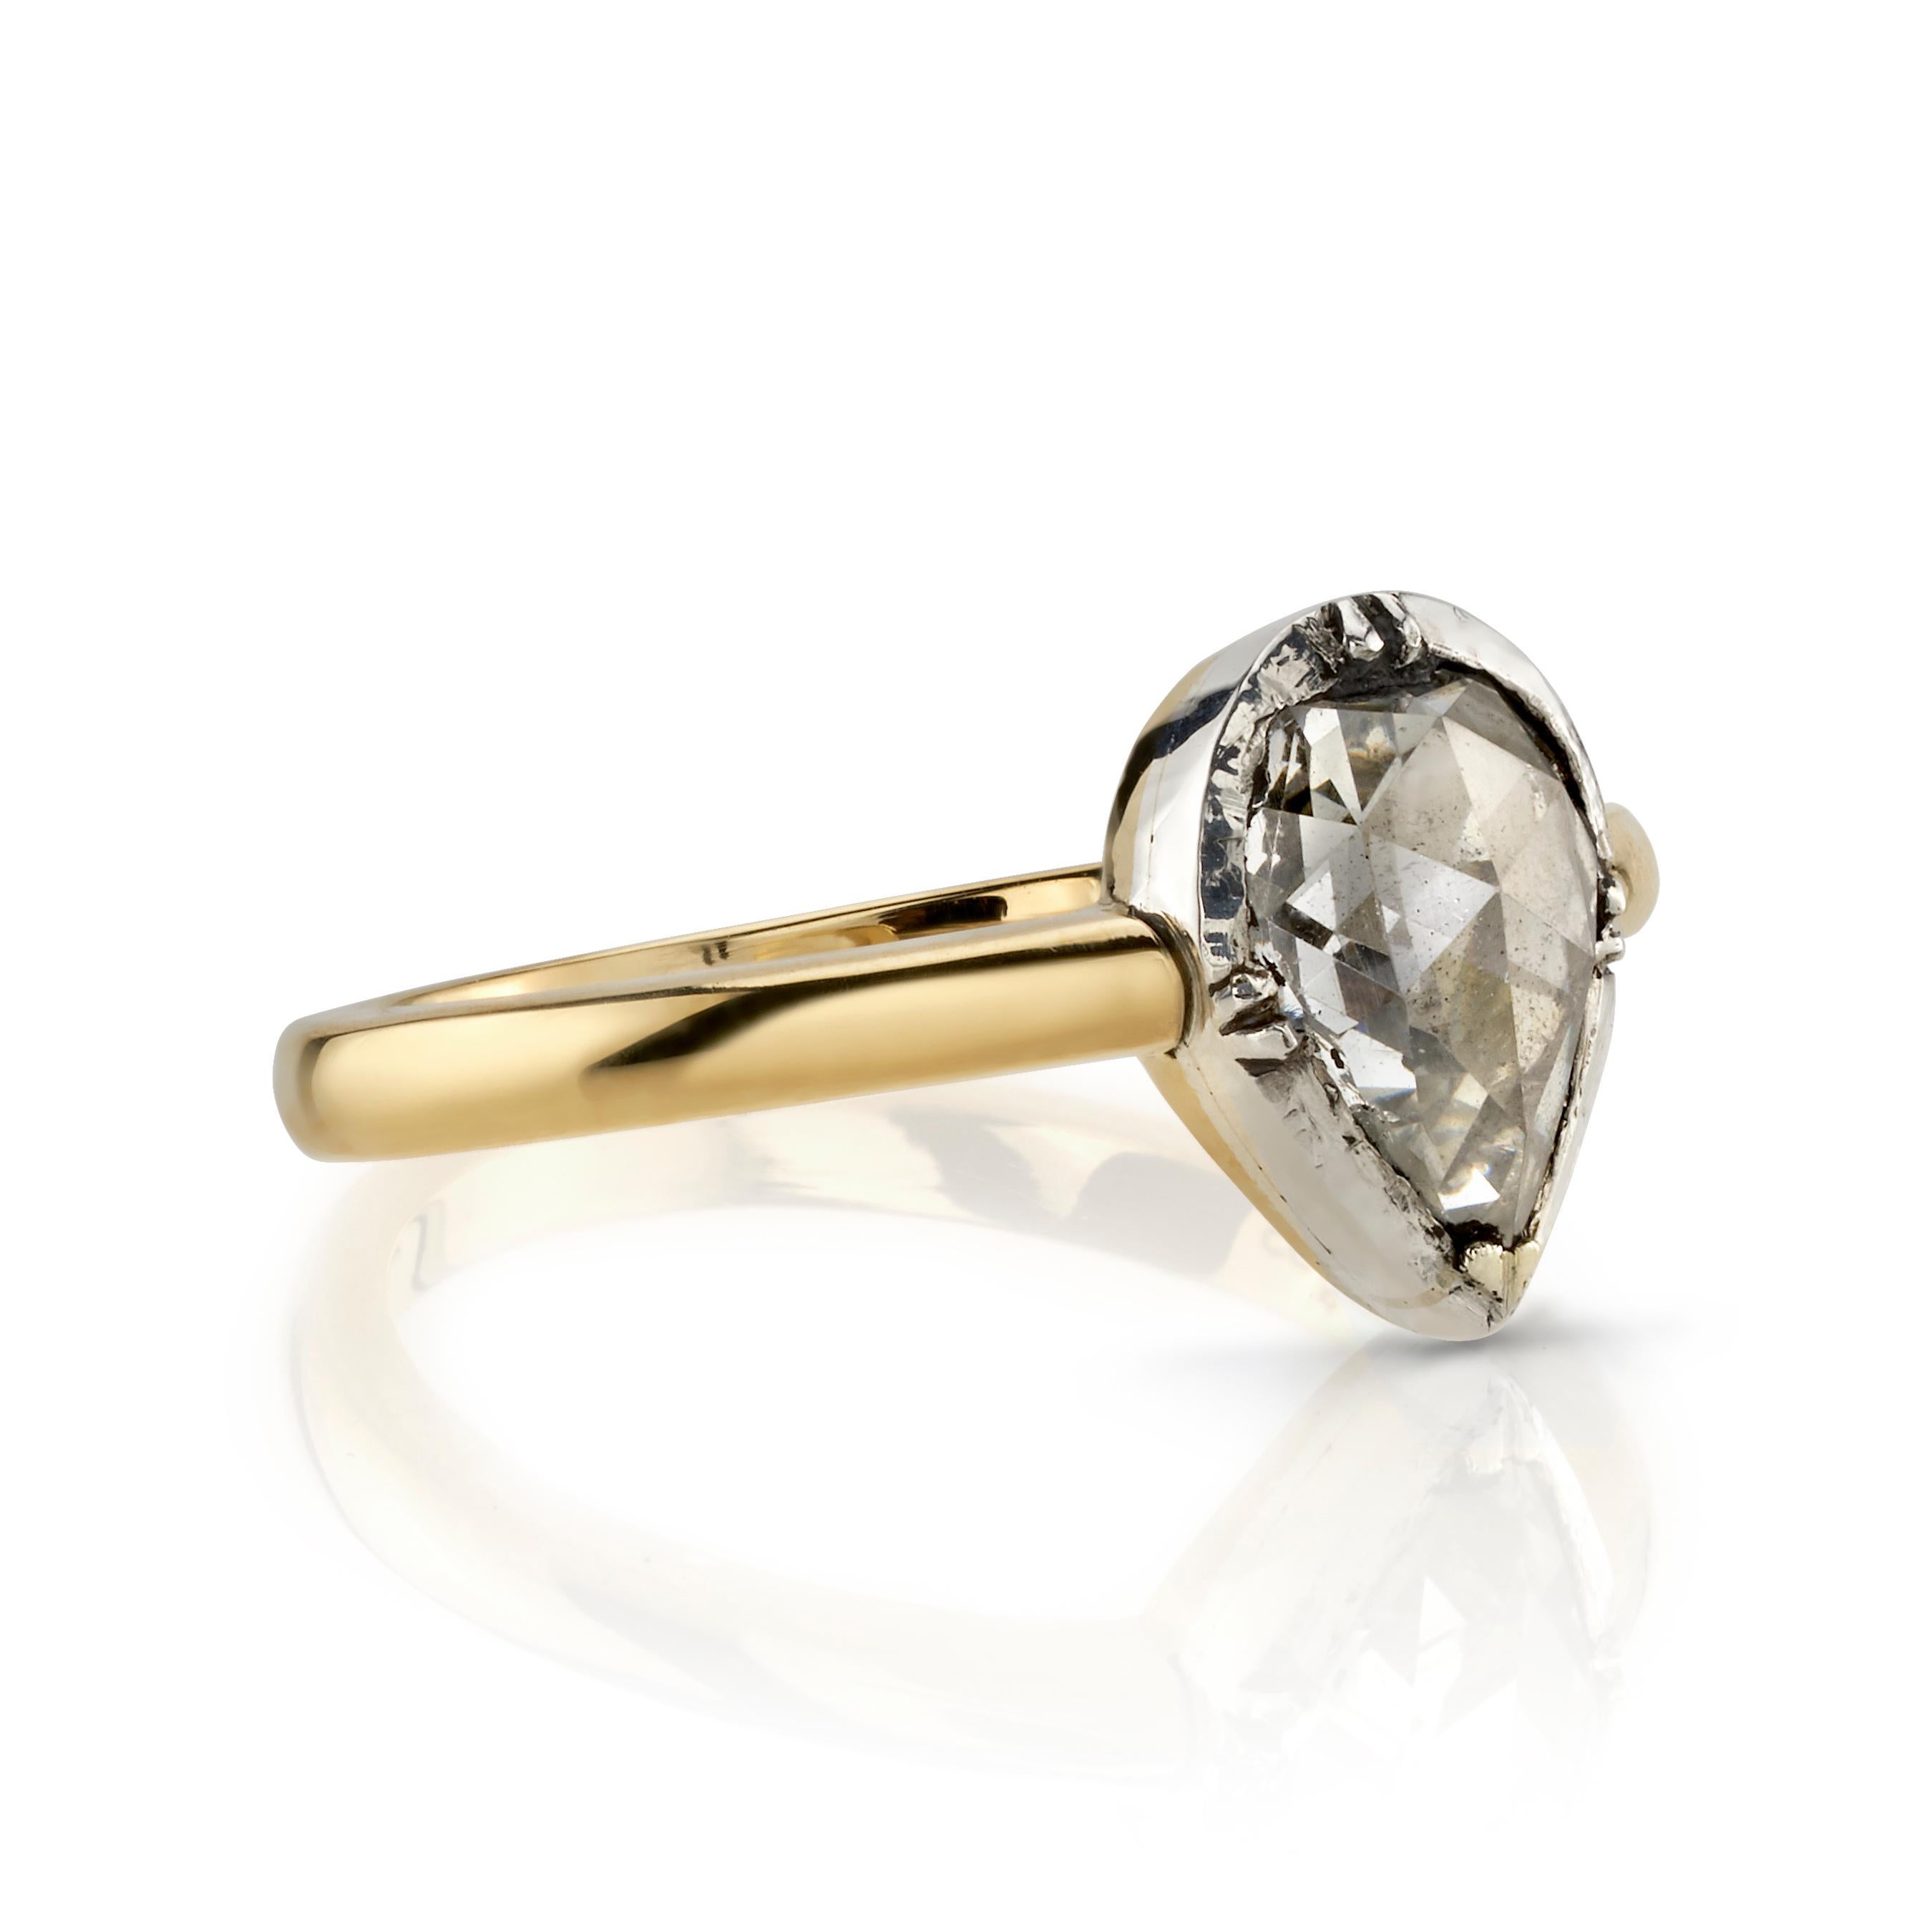 1.25ct J-K/SI pear shaped rose cut diamond set in a handcrafted 18K yellow gold mounting. Diamond is prong set in an oxidized sterling silver head.

Ring is currently size 6. Please contact us about potential re-sizing.

Our jewelry is made locally